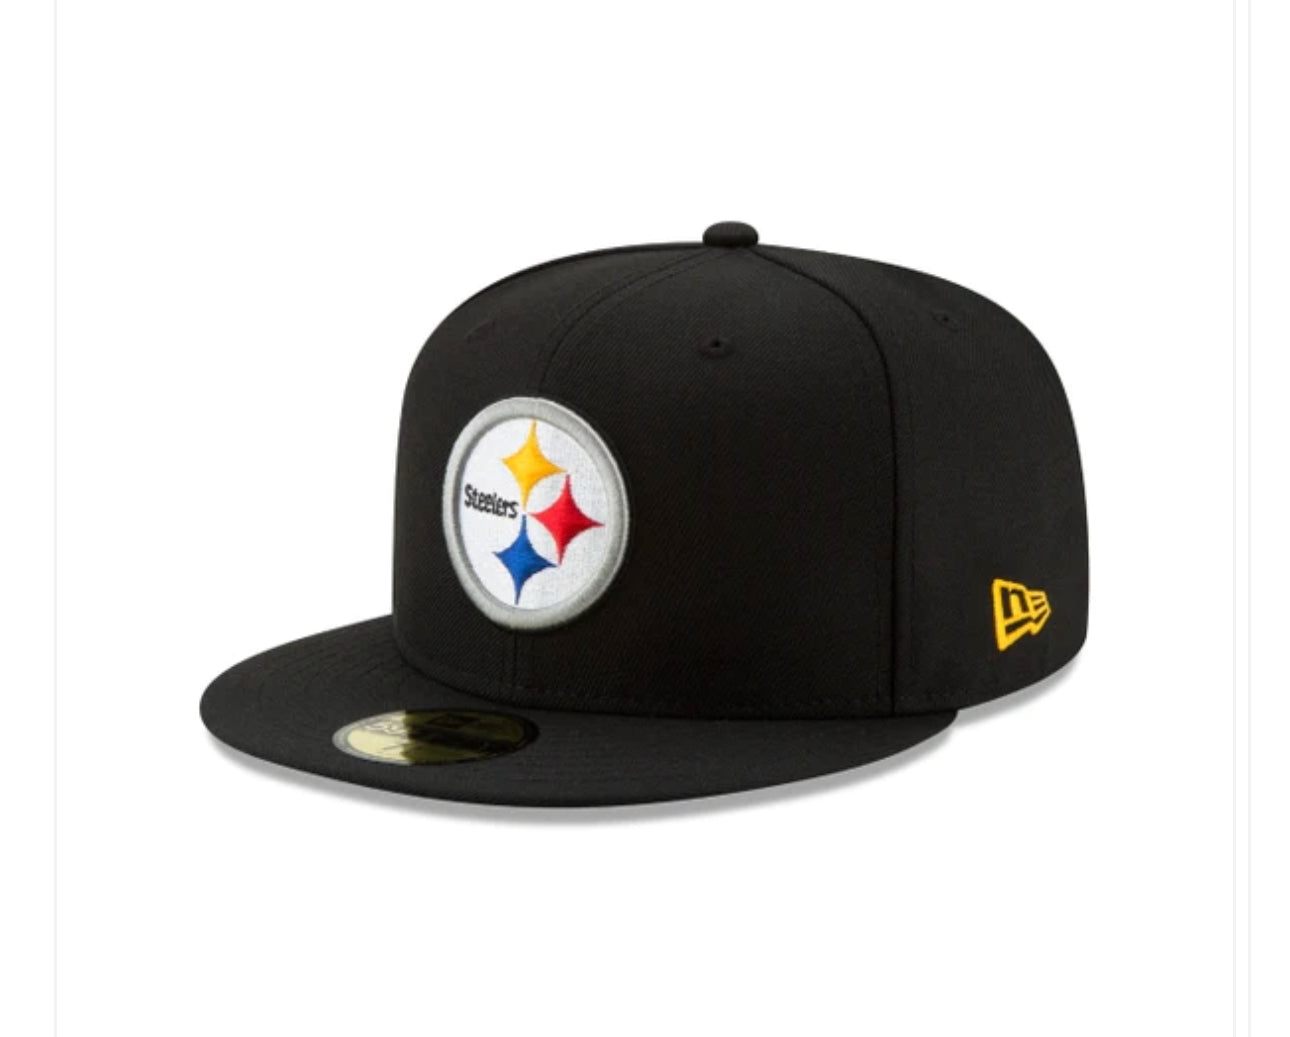 New Era Fitted "Steelers"